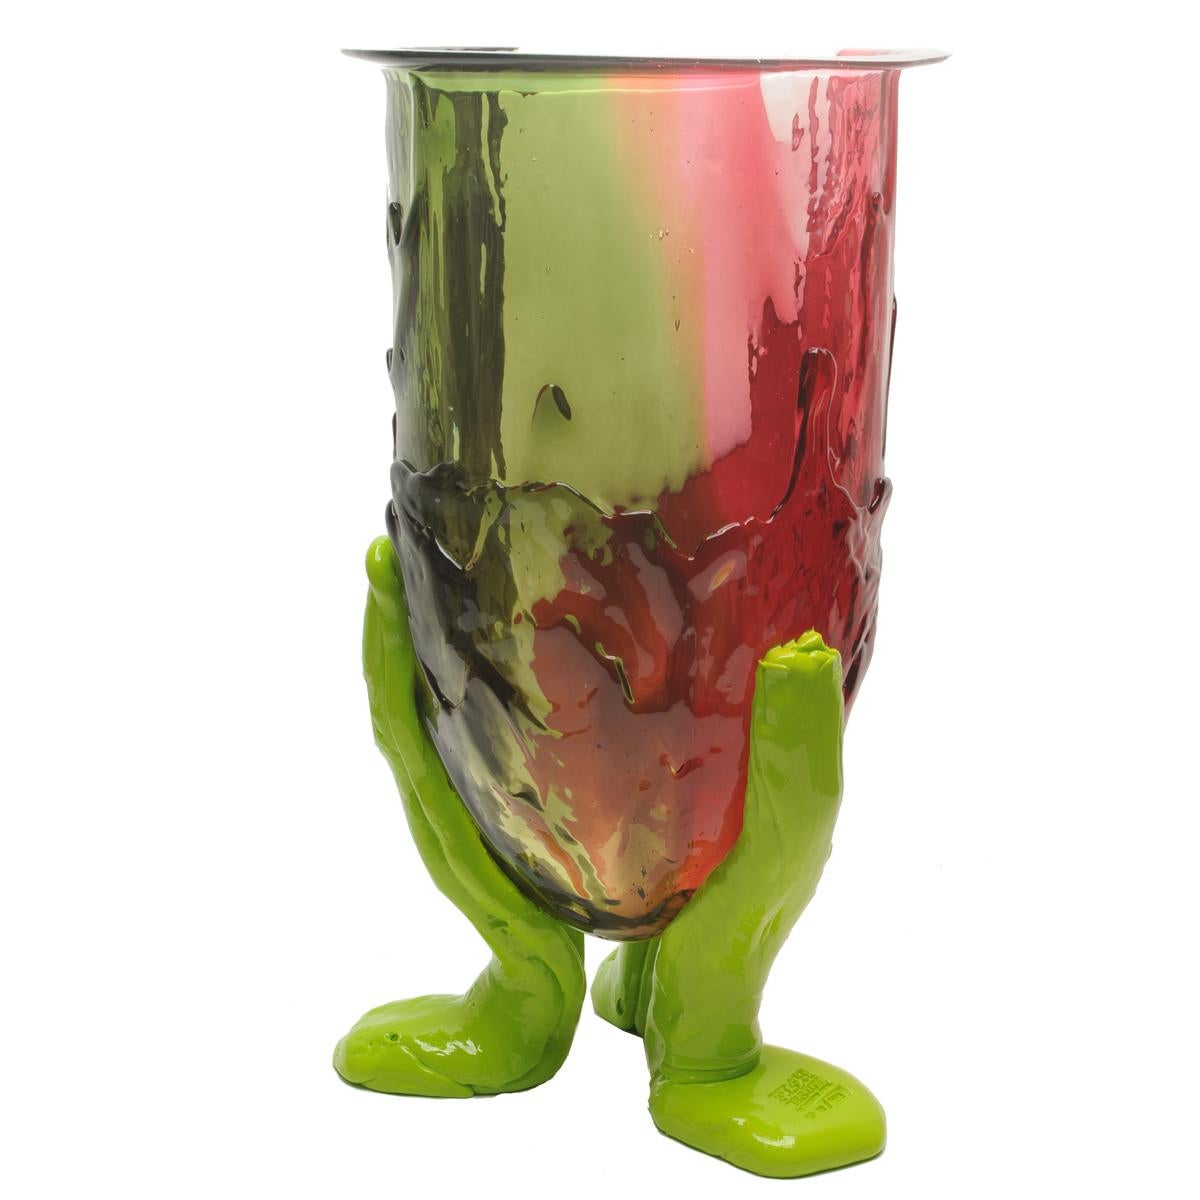 Amazonia vase - clear green, fuchsia, matt white, lime
Vase in soft resin designed by Gaetano Pesce in 1995 for Fish Design collection.

Measures: XL - ø 30cm x H 56cm
Other sizes available.
Colors: clear green, fuchsia, matt white,